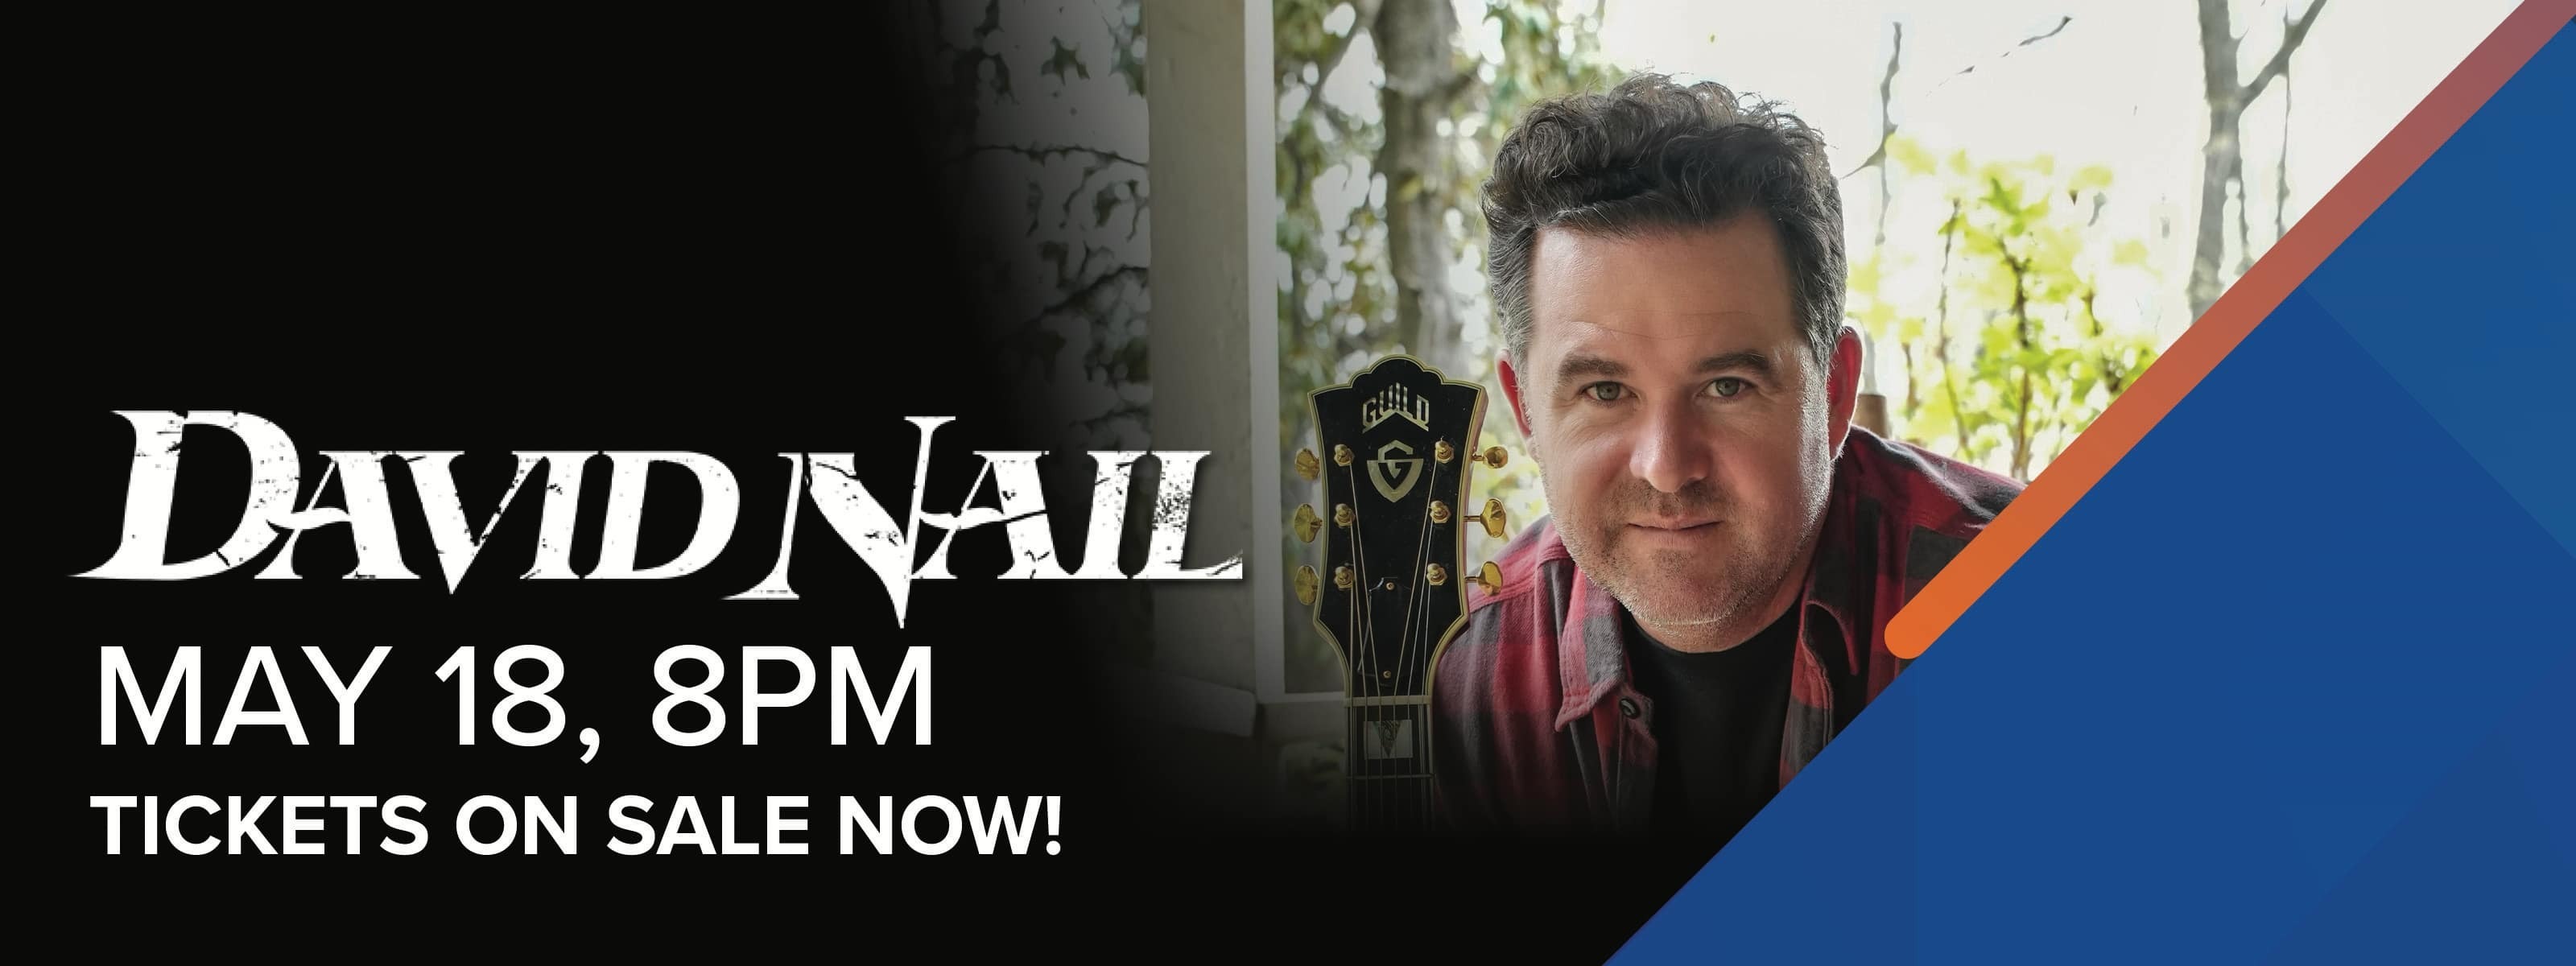 David Nail May 18 at 8PM Tickets On Sale Now